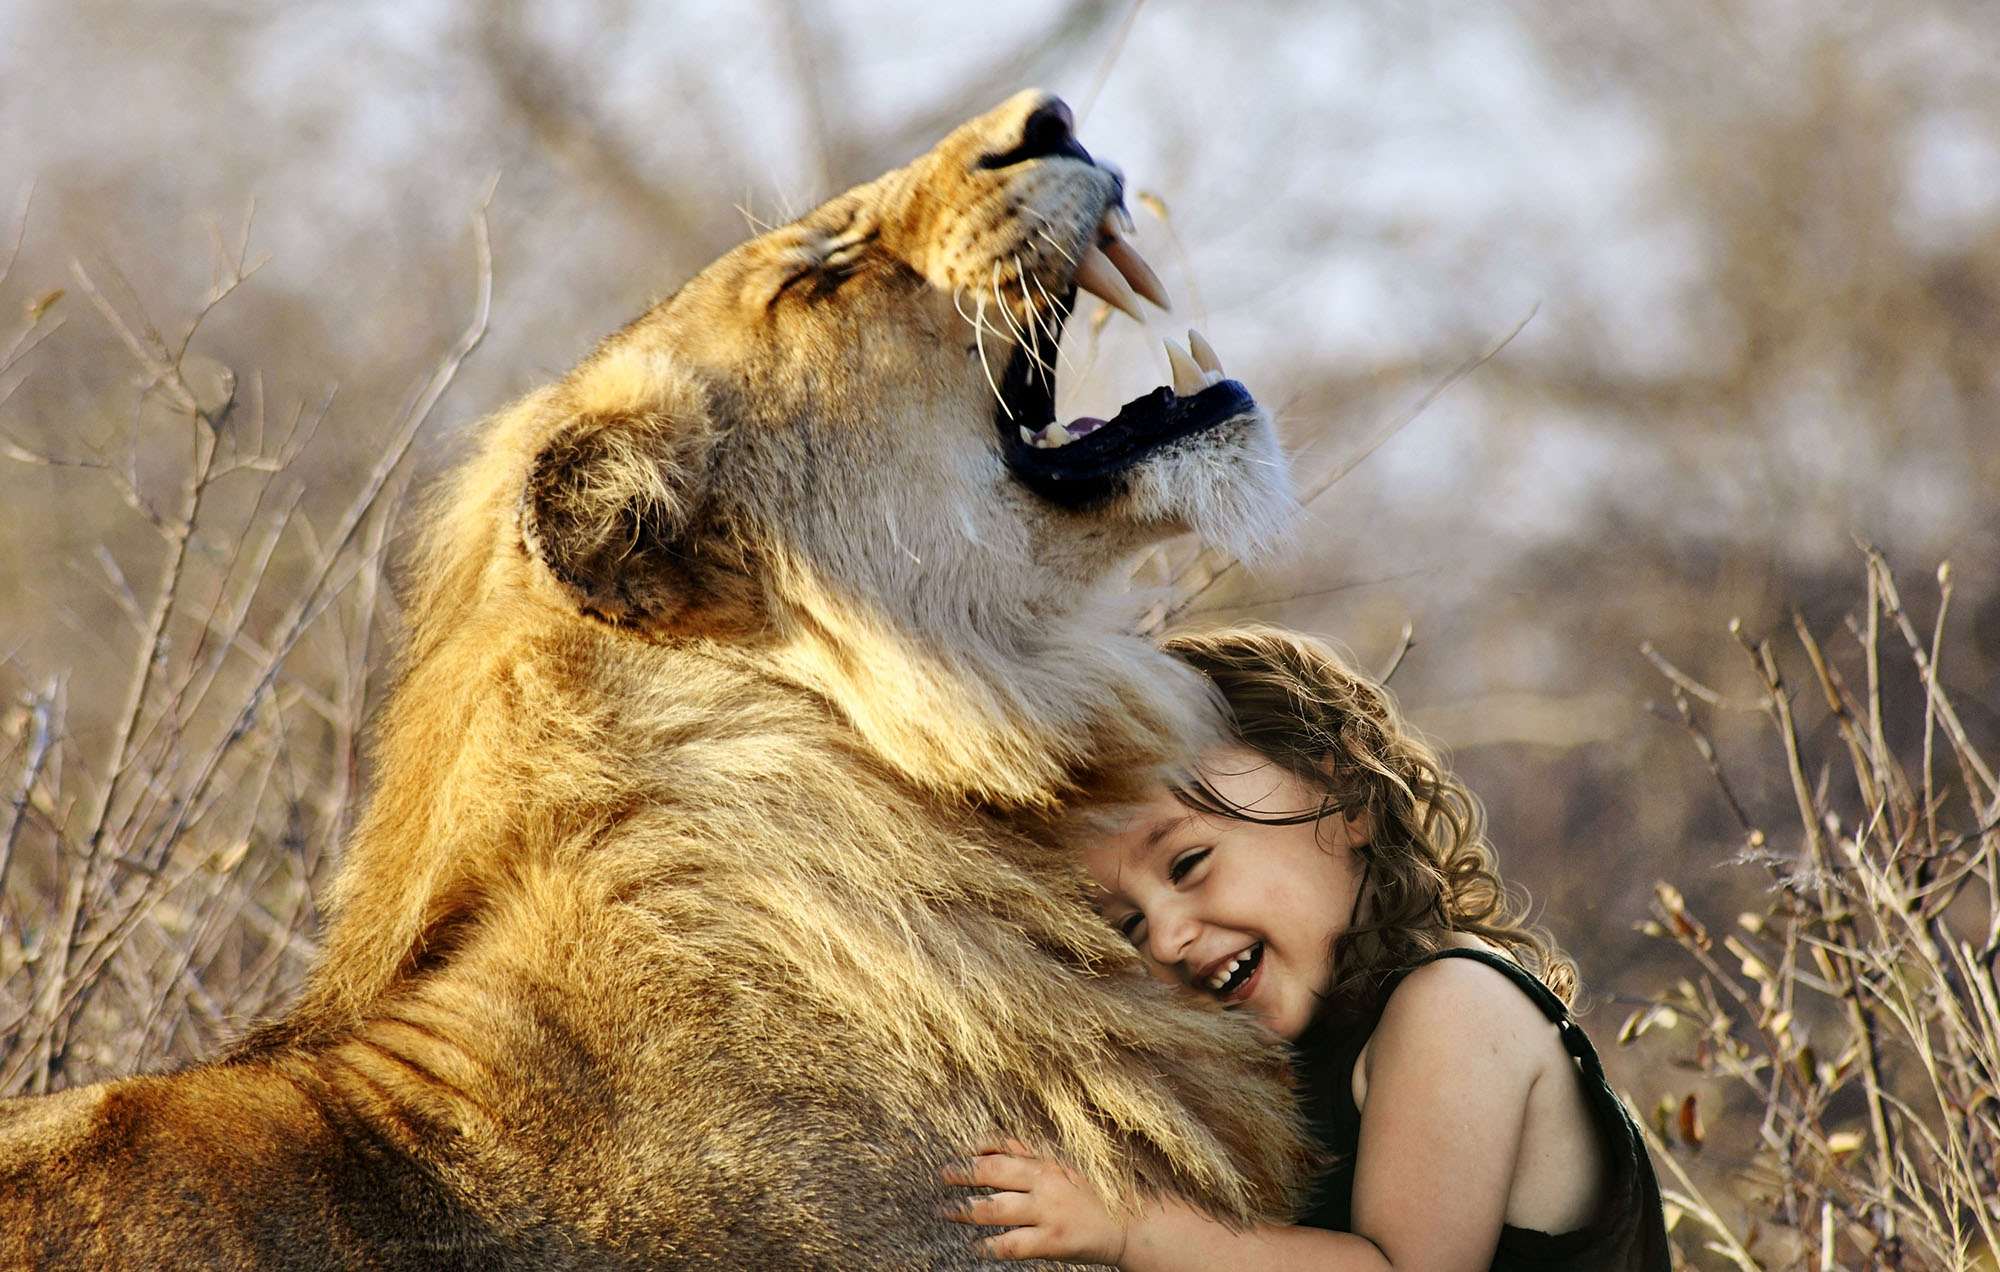 image of a friendly roaring lion and a smiling child embracing it